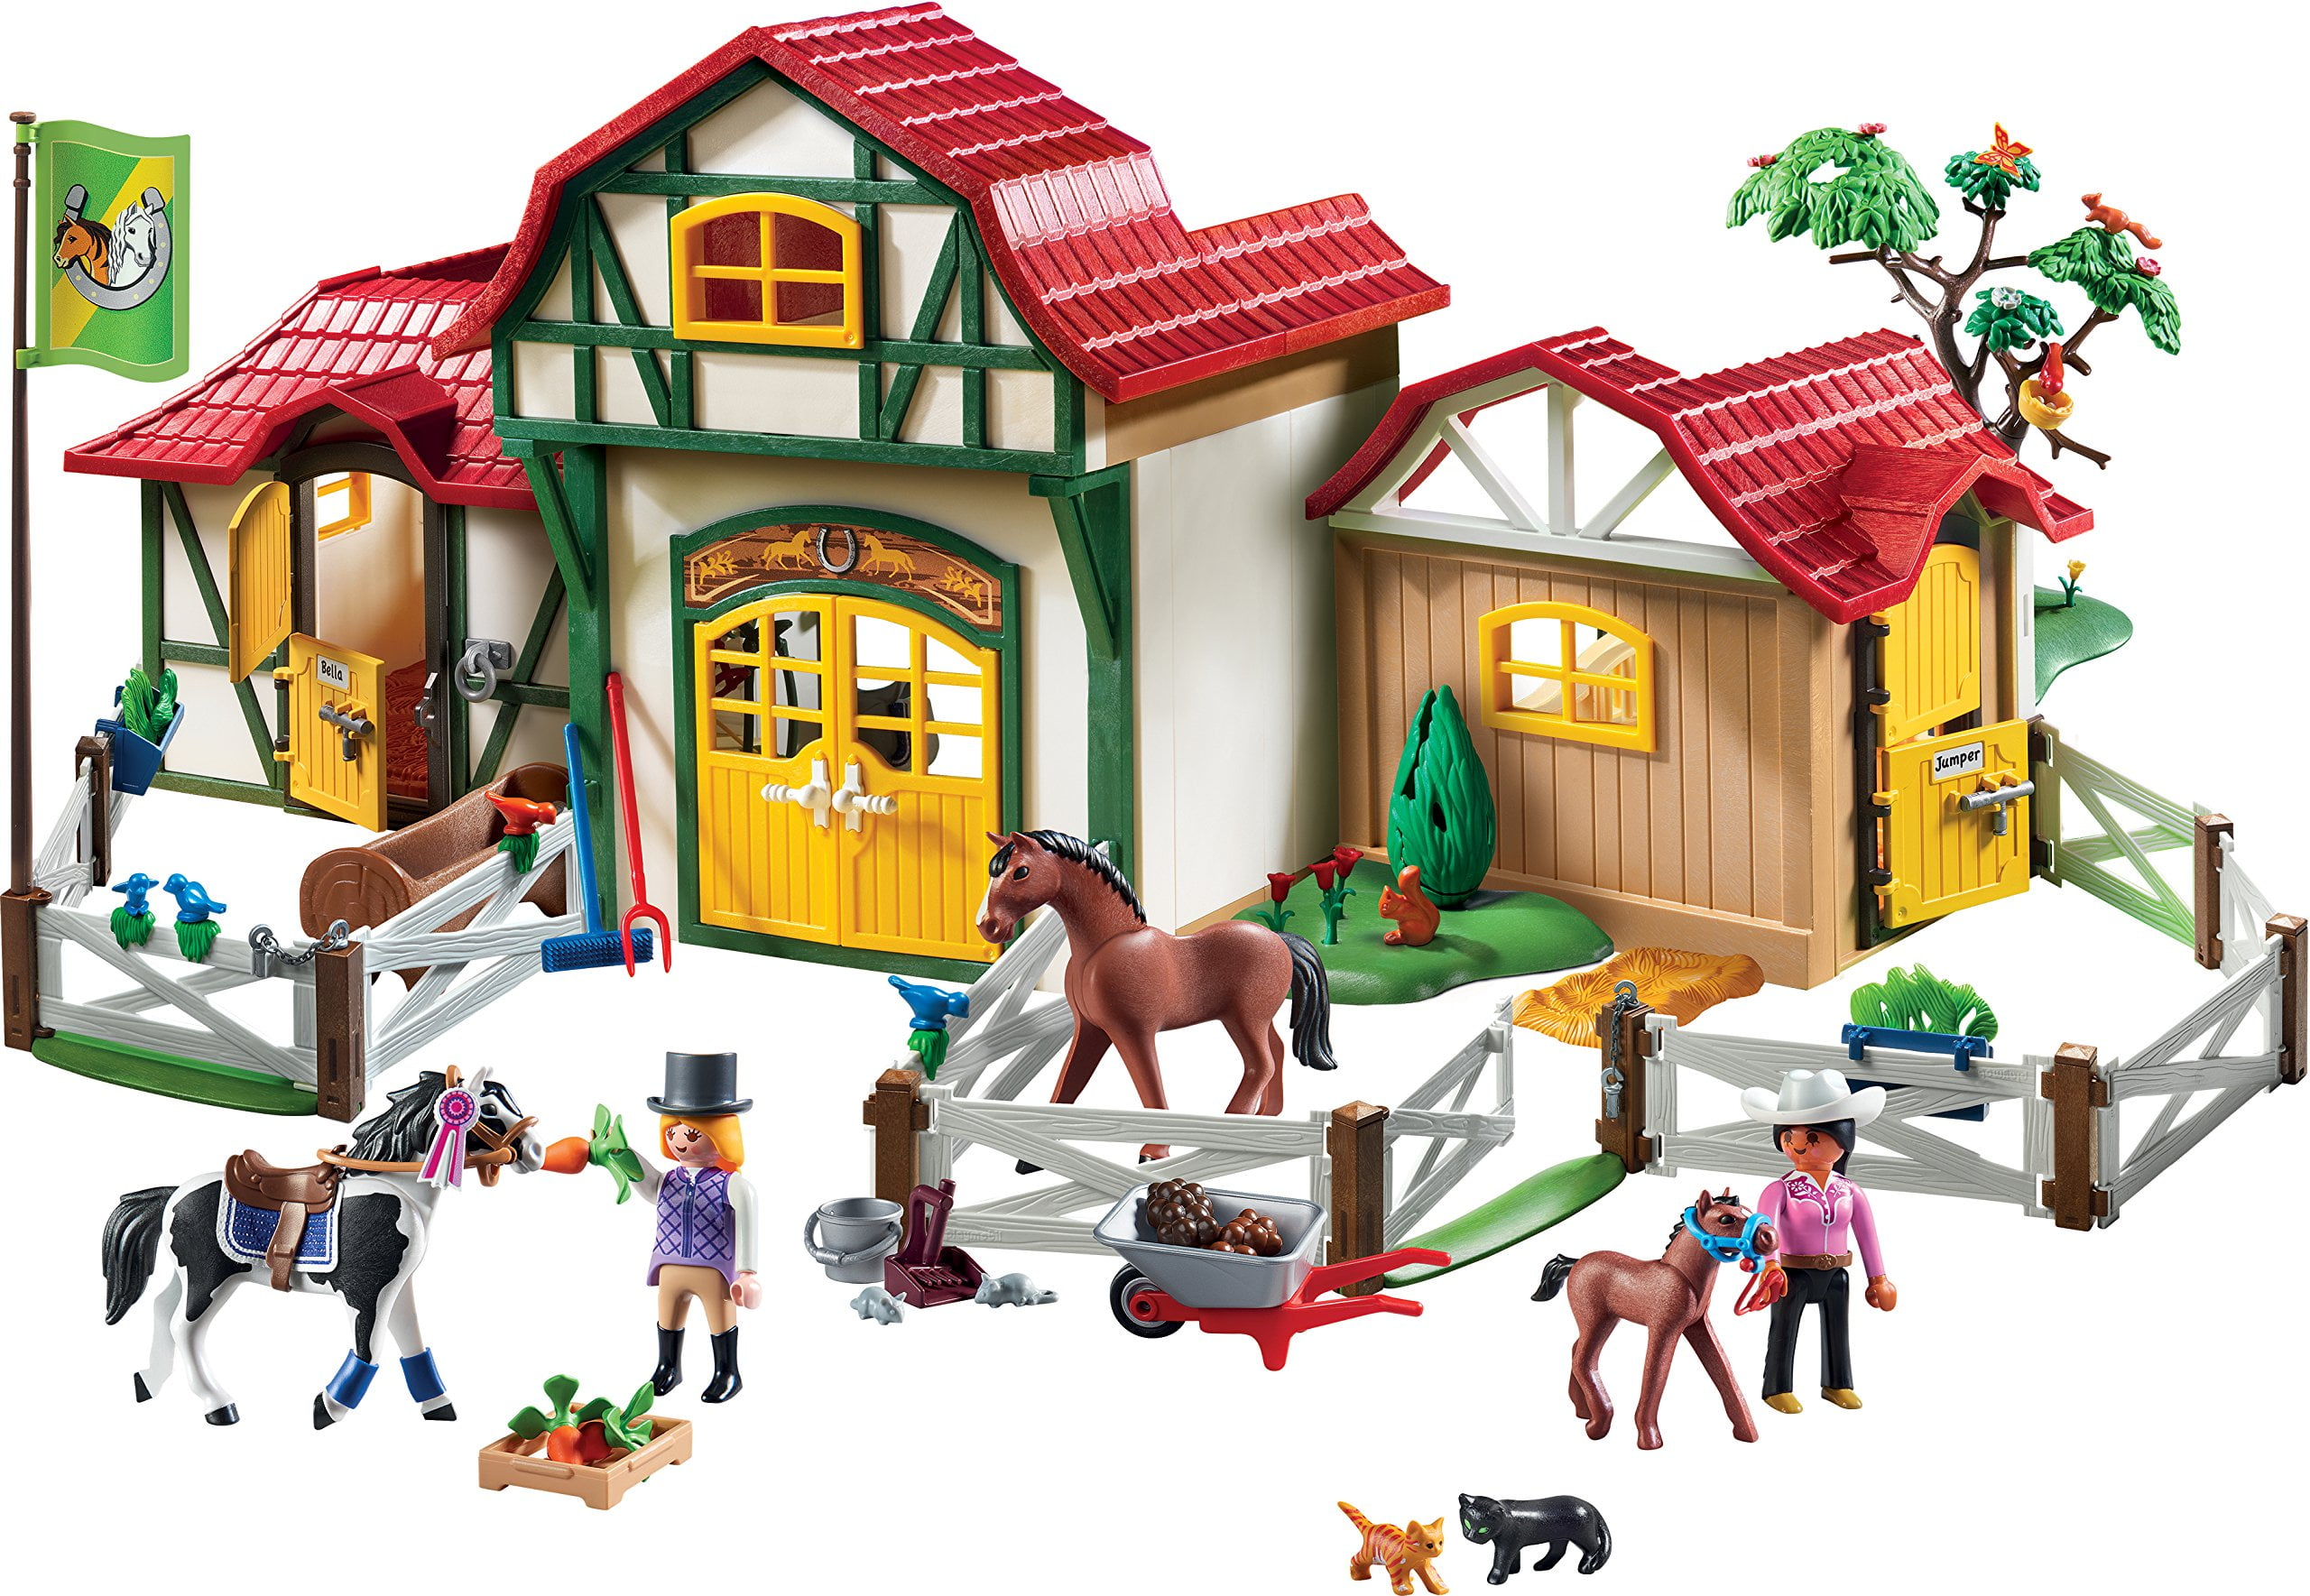 t21126 grey base for shed roof stables cow 4490 Playmobil farm 